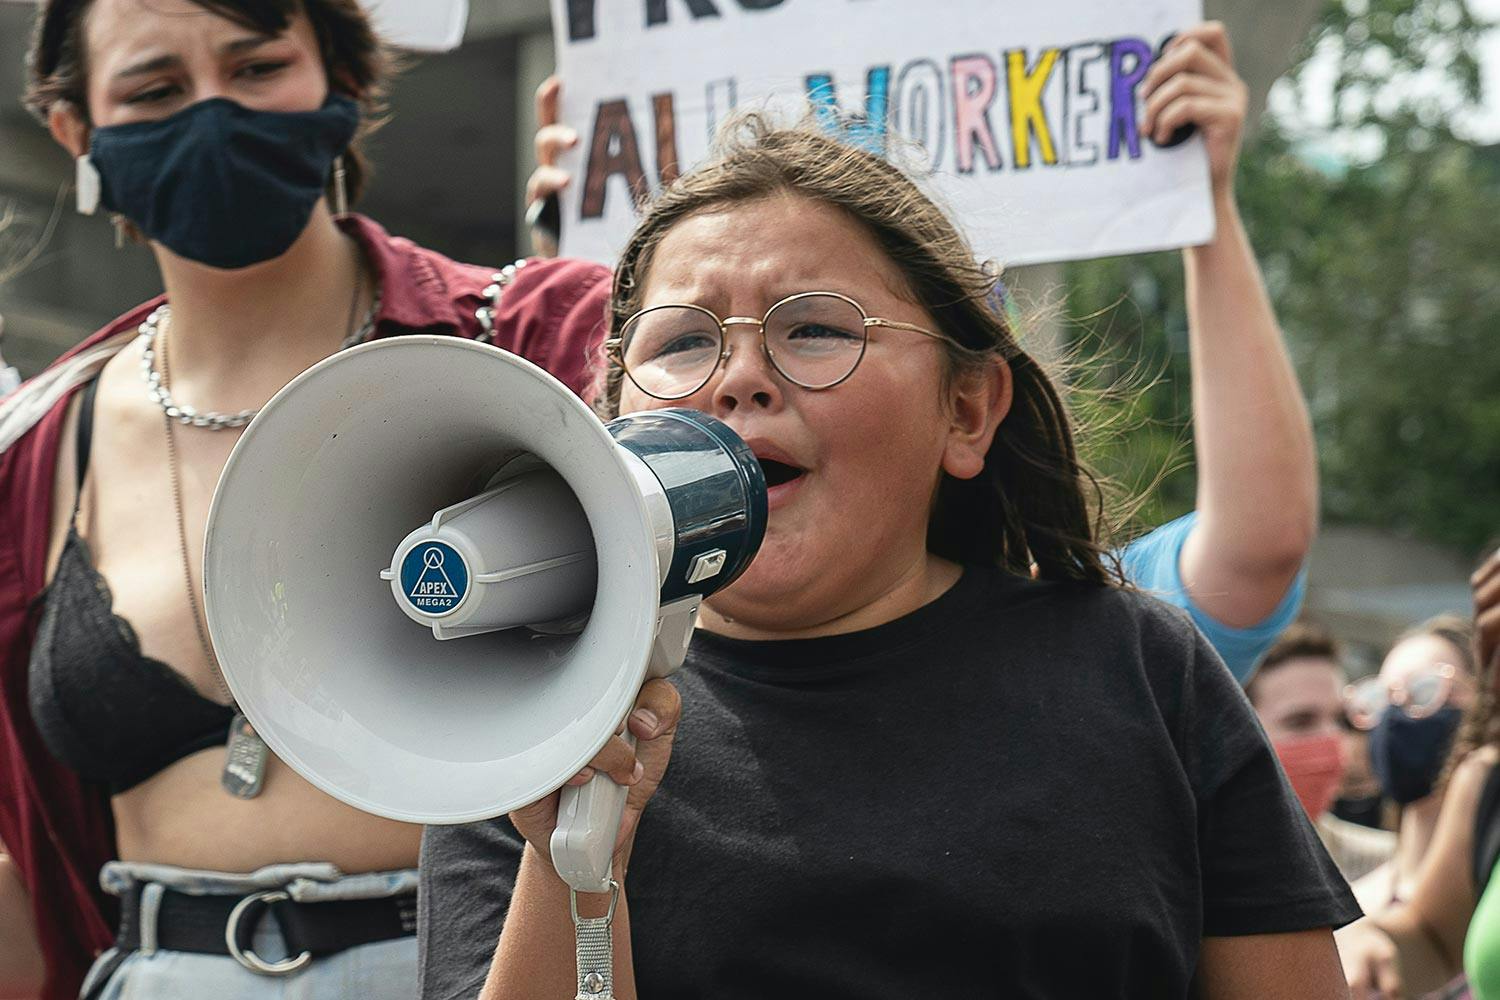 A child with long brown hair, wheatish skin, and glasses shouts into a megaphone as a crowd of protesters walks behind her.